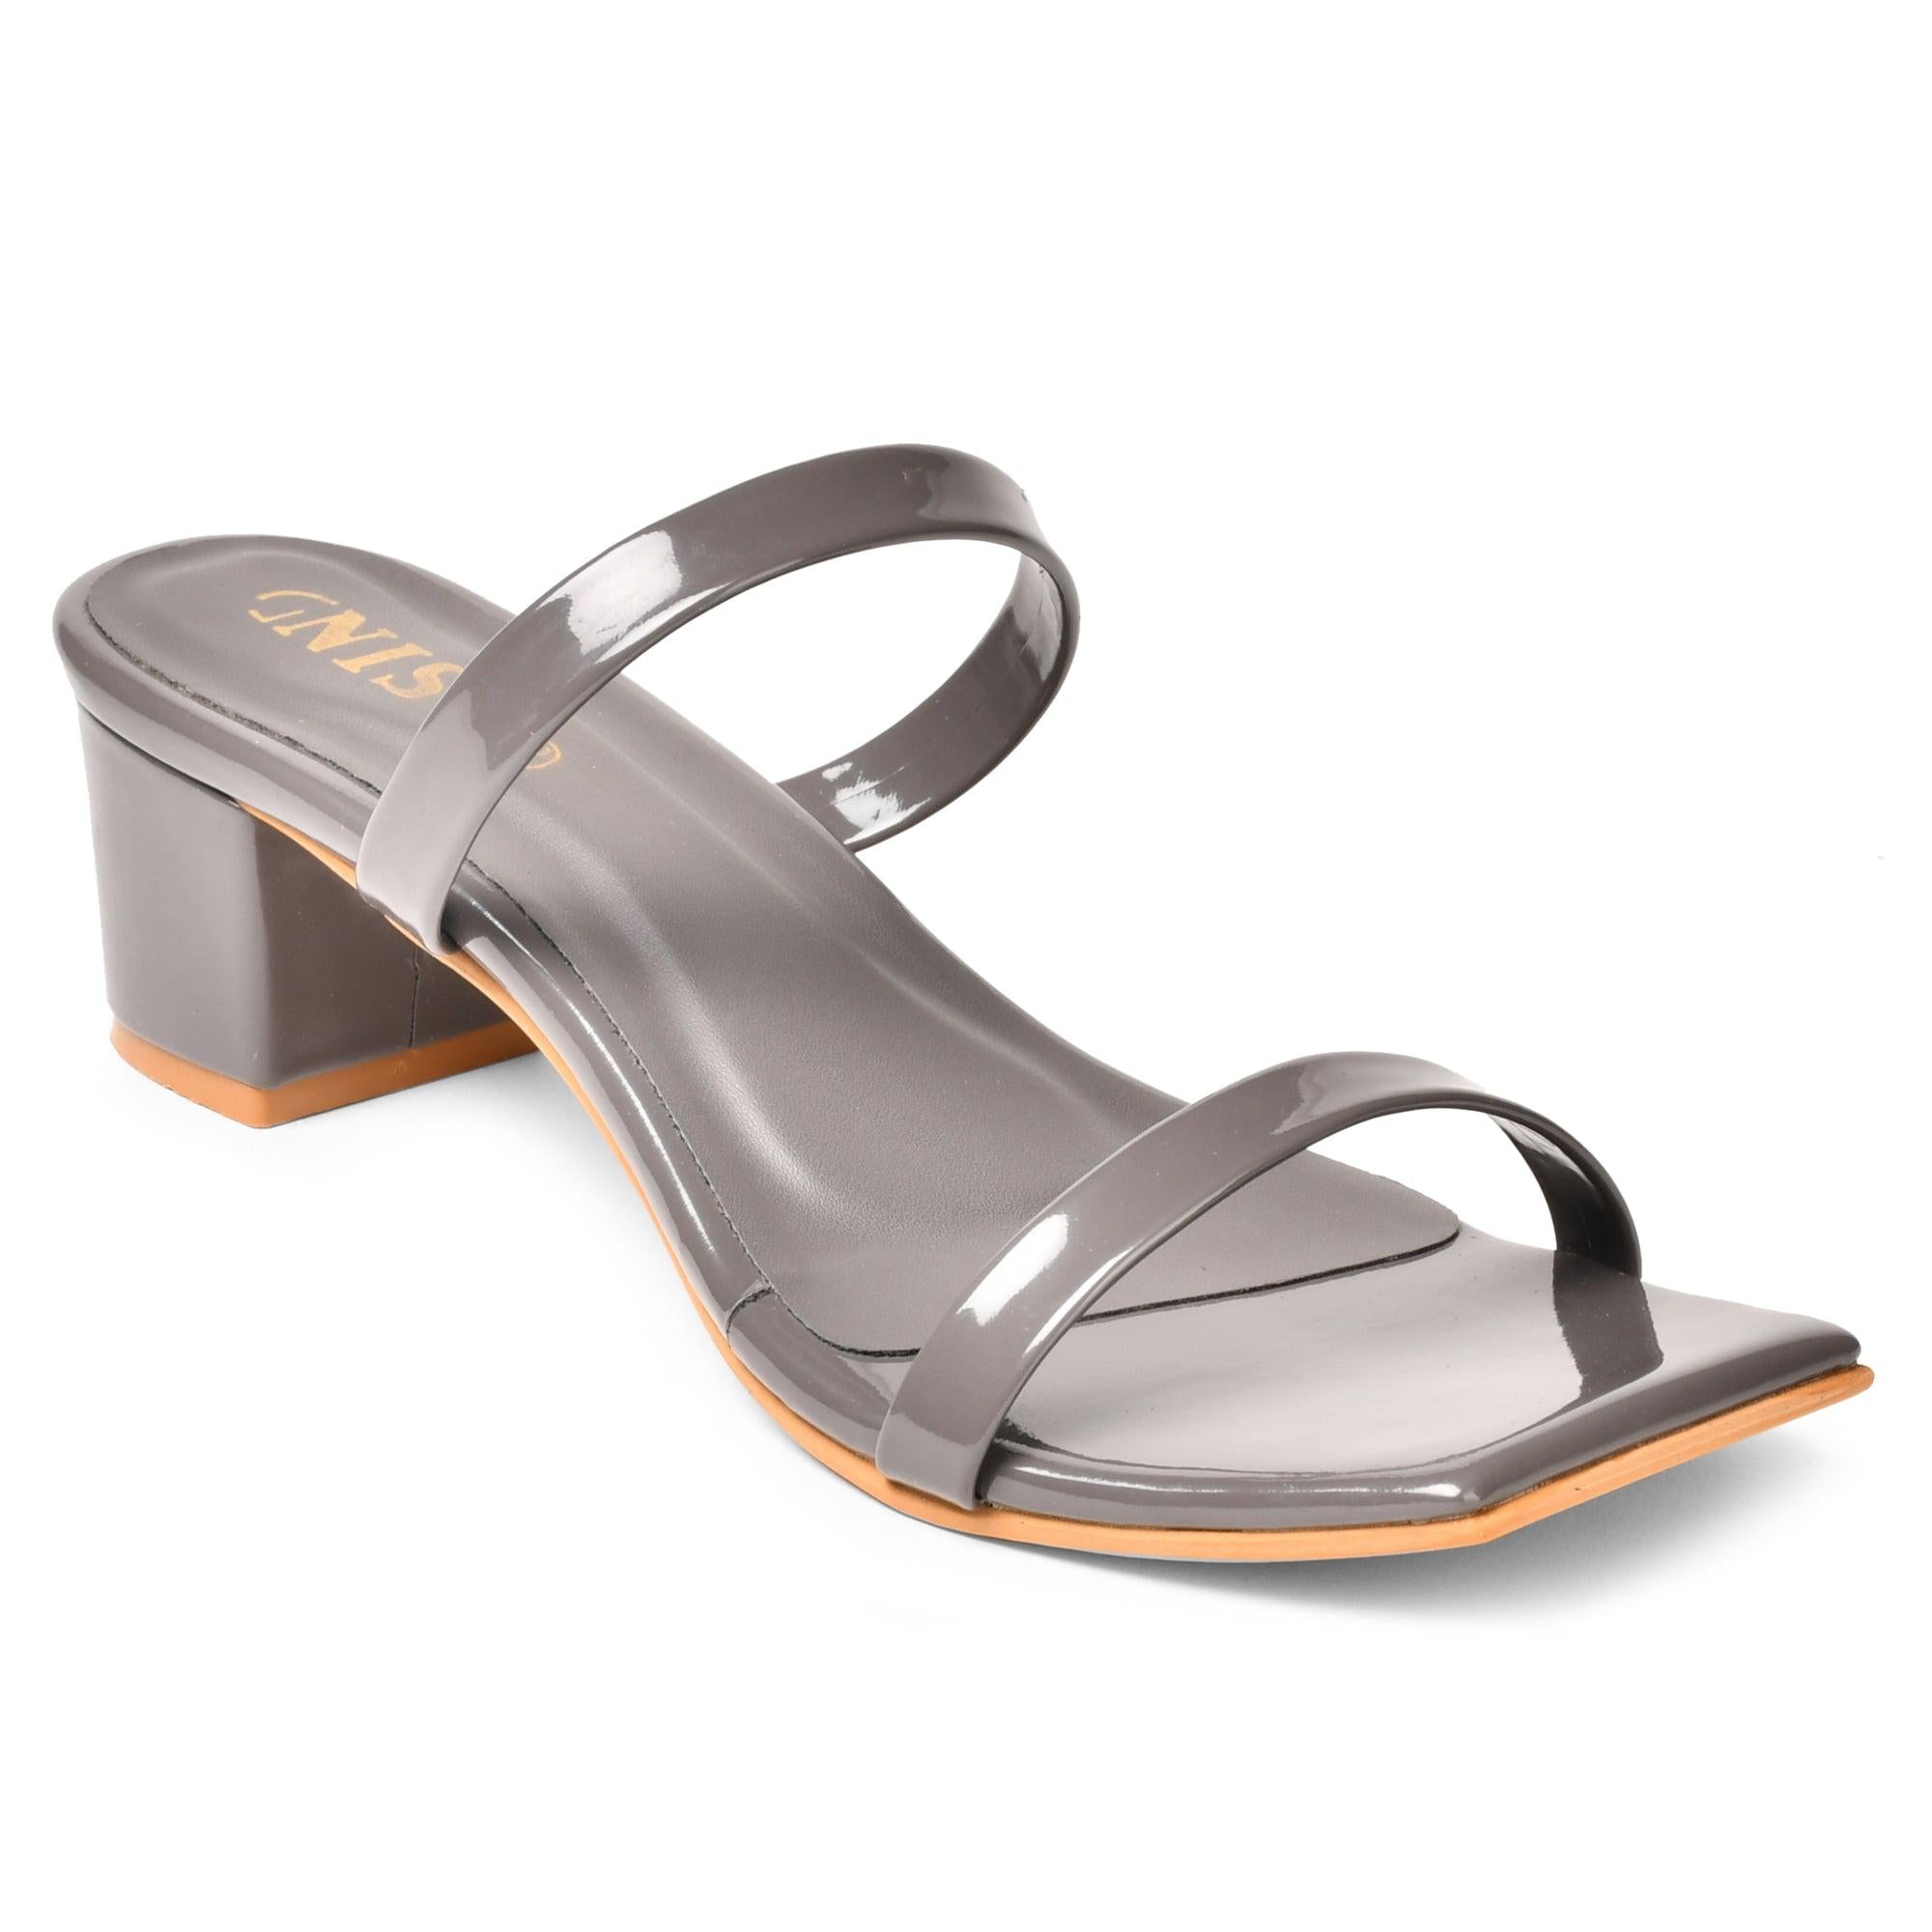 White Buckled Double Strap Slide Sandals - CHARLES & KEITH PH